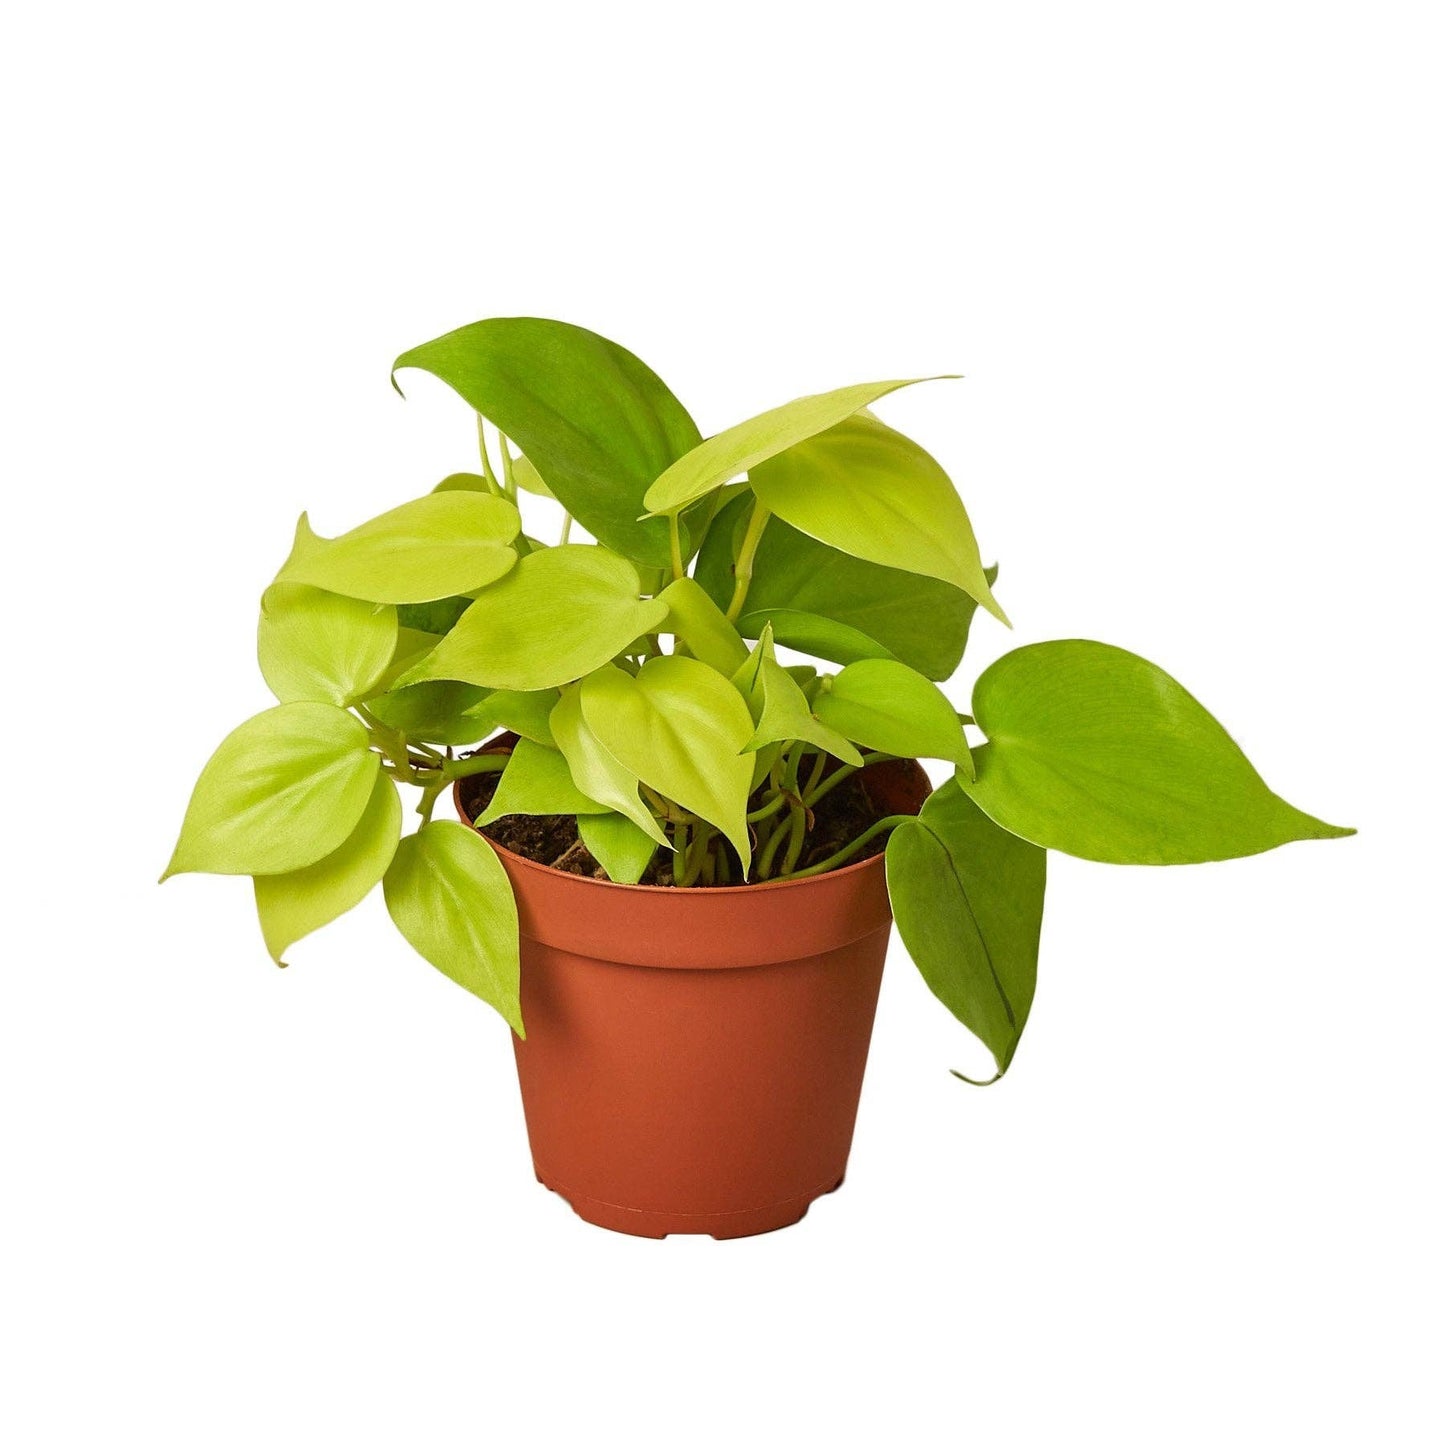 Philodendron 'Neon': 4" Pot